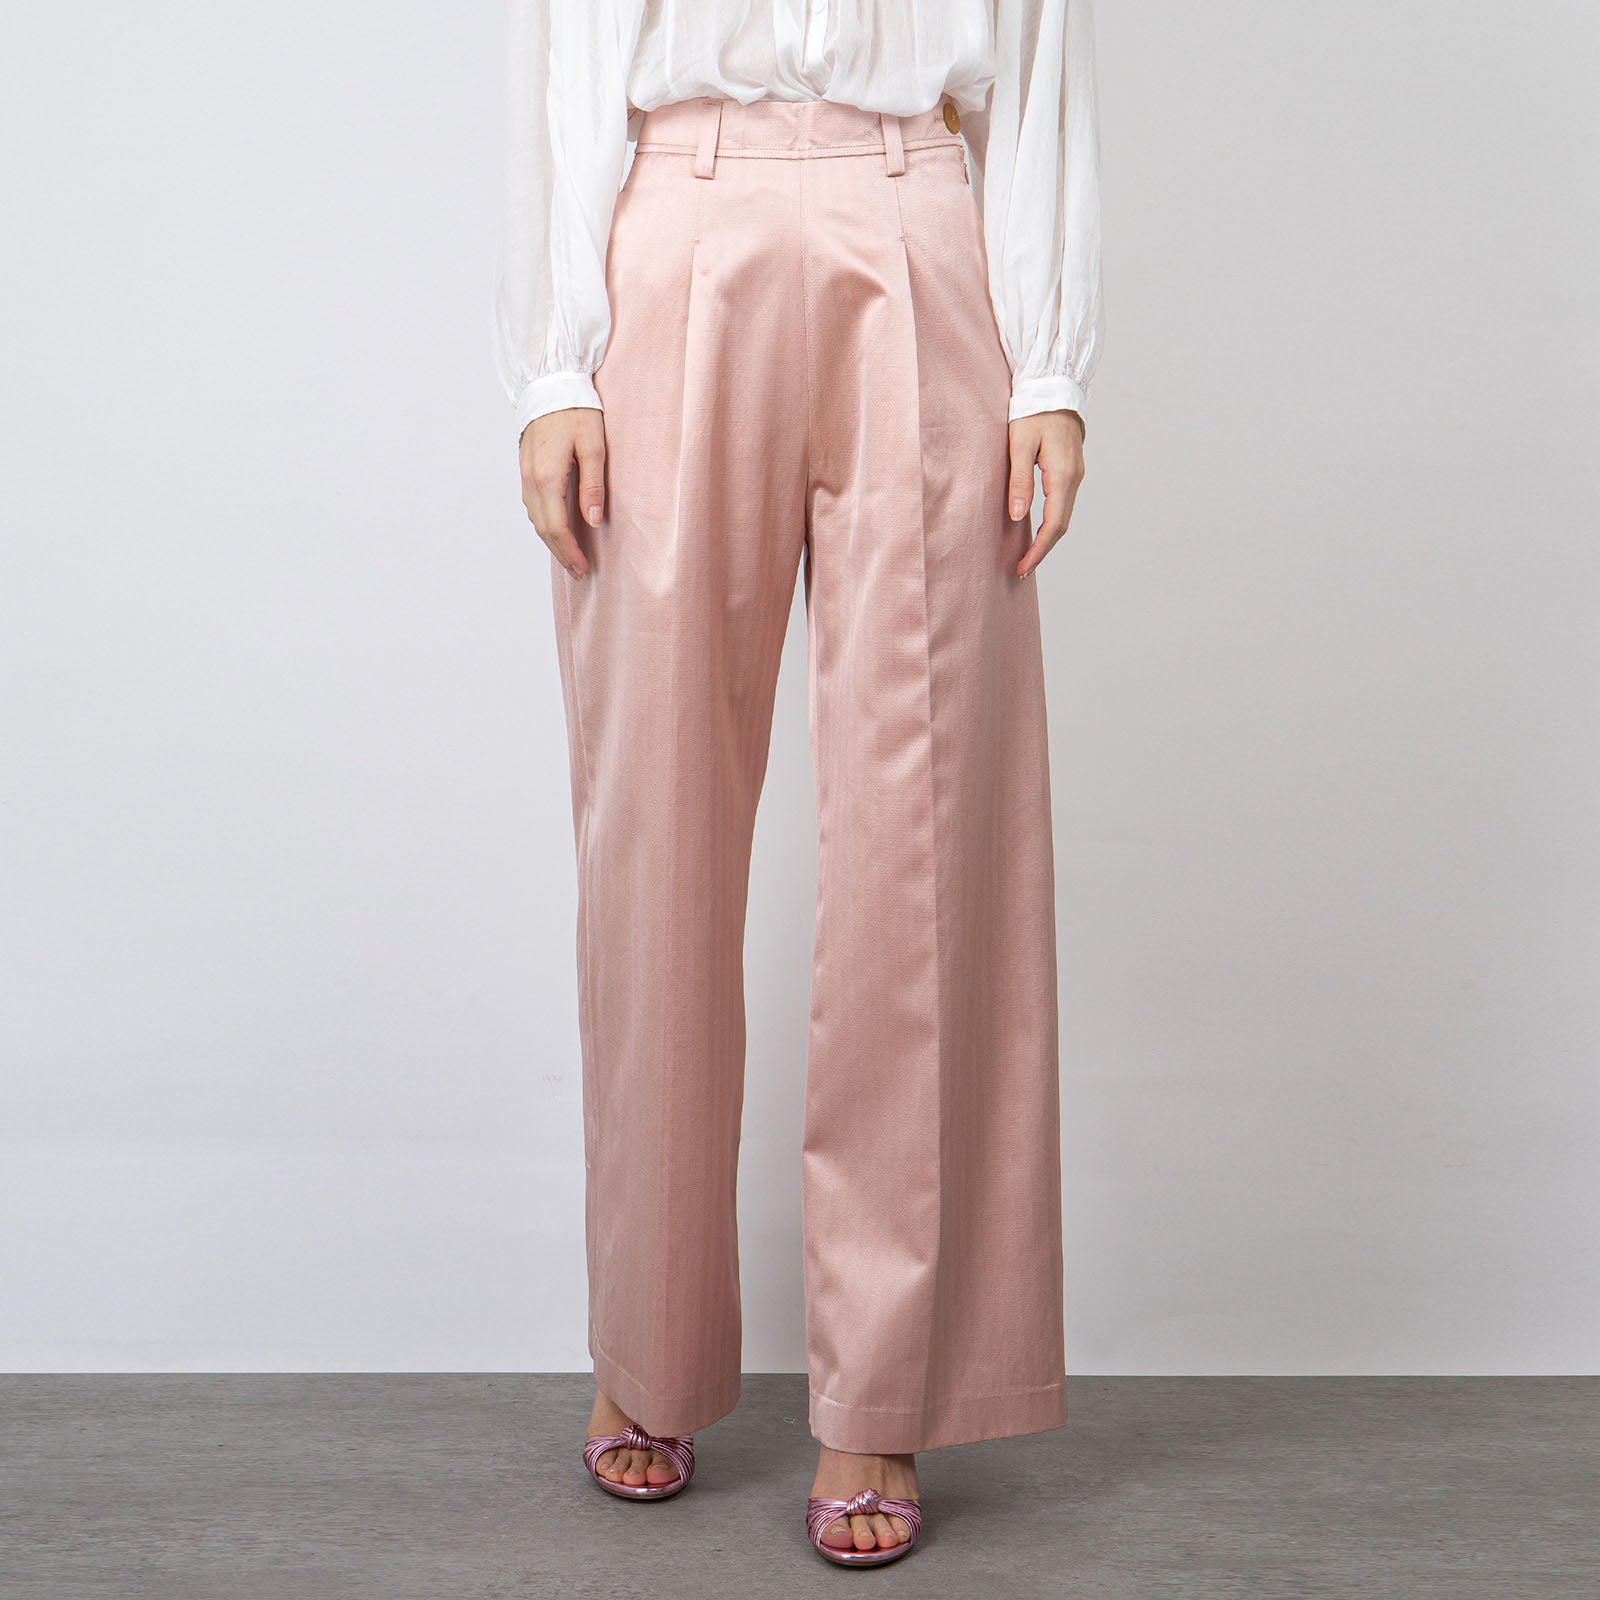 Forte Forte High-Waisted Tailored Trousers in Light Pink Cotton - 7